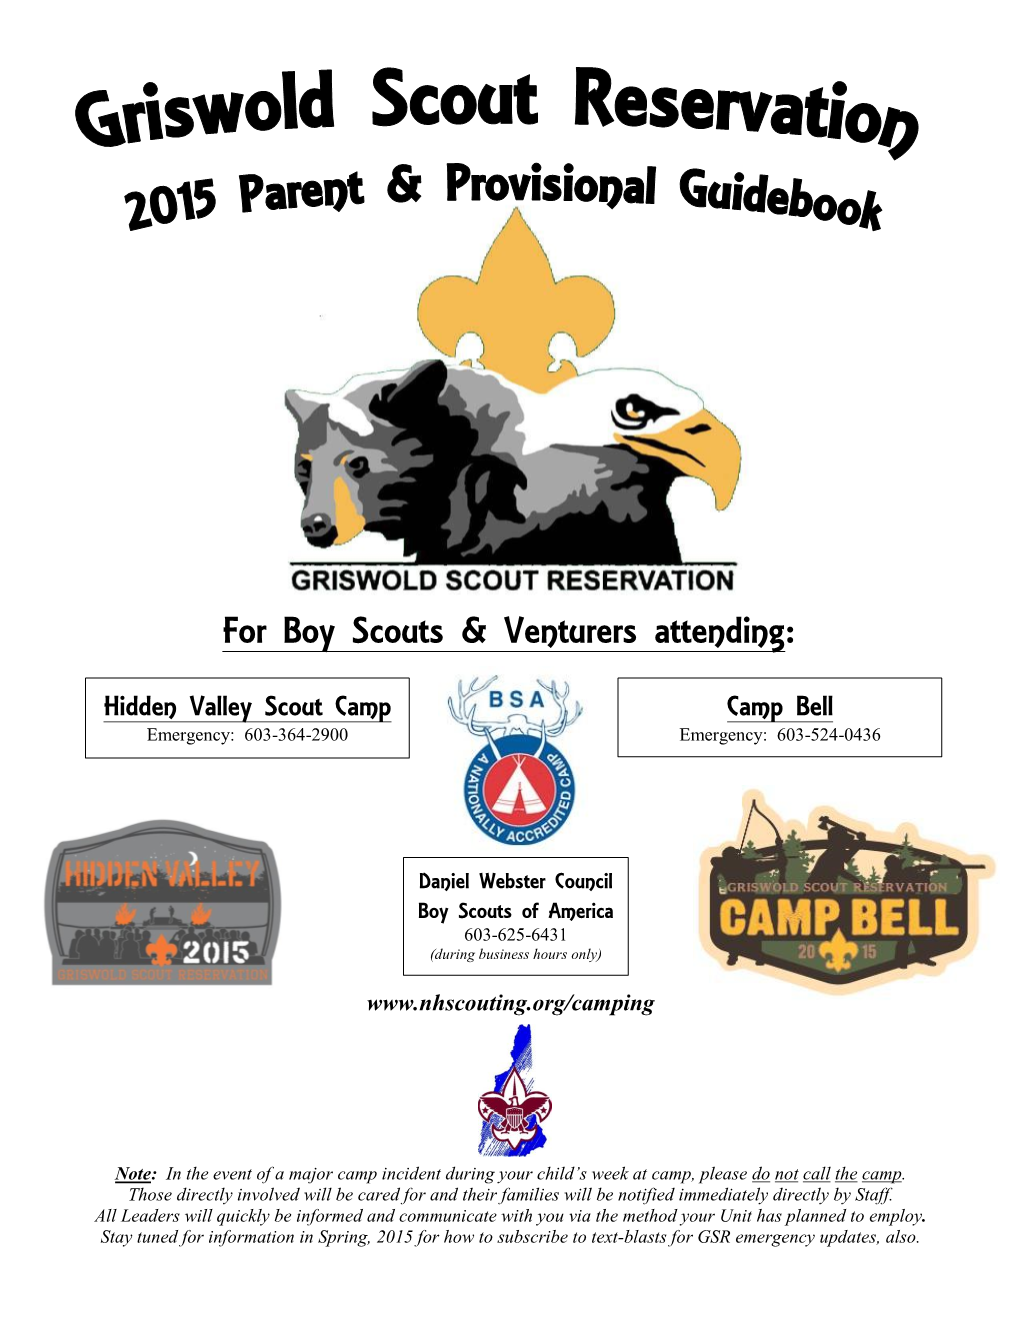 For Boy Scouts & Venturers Attending